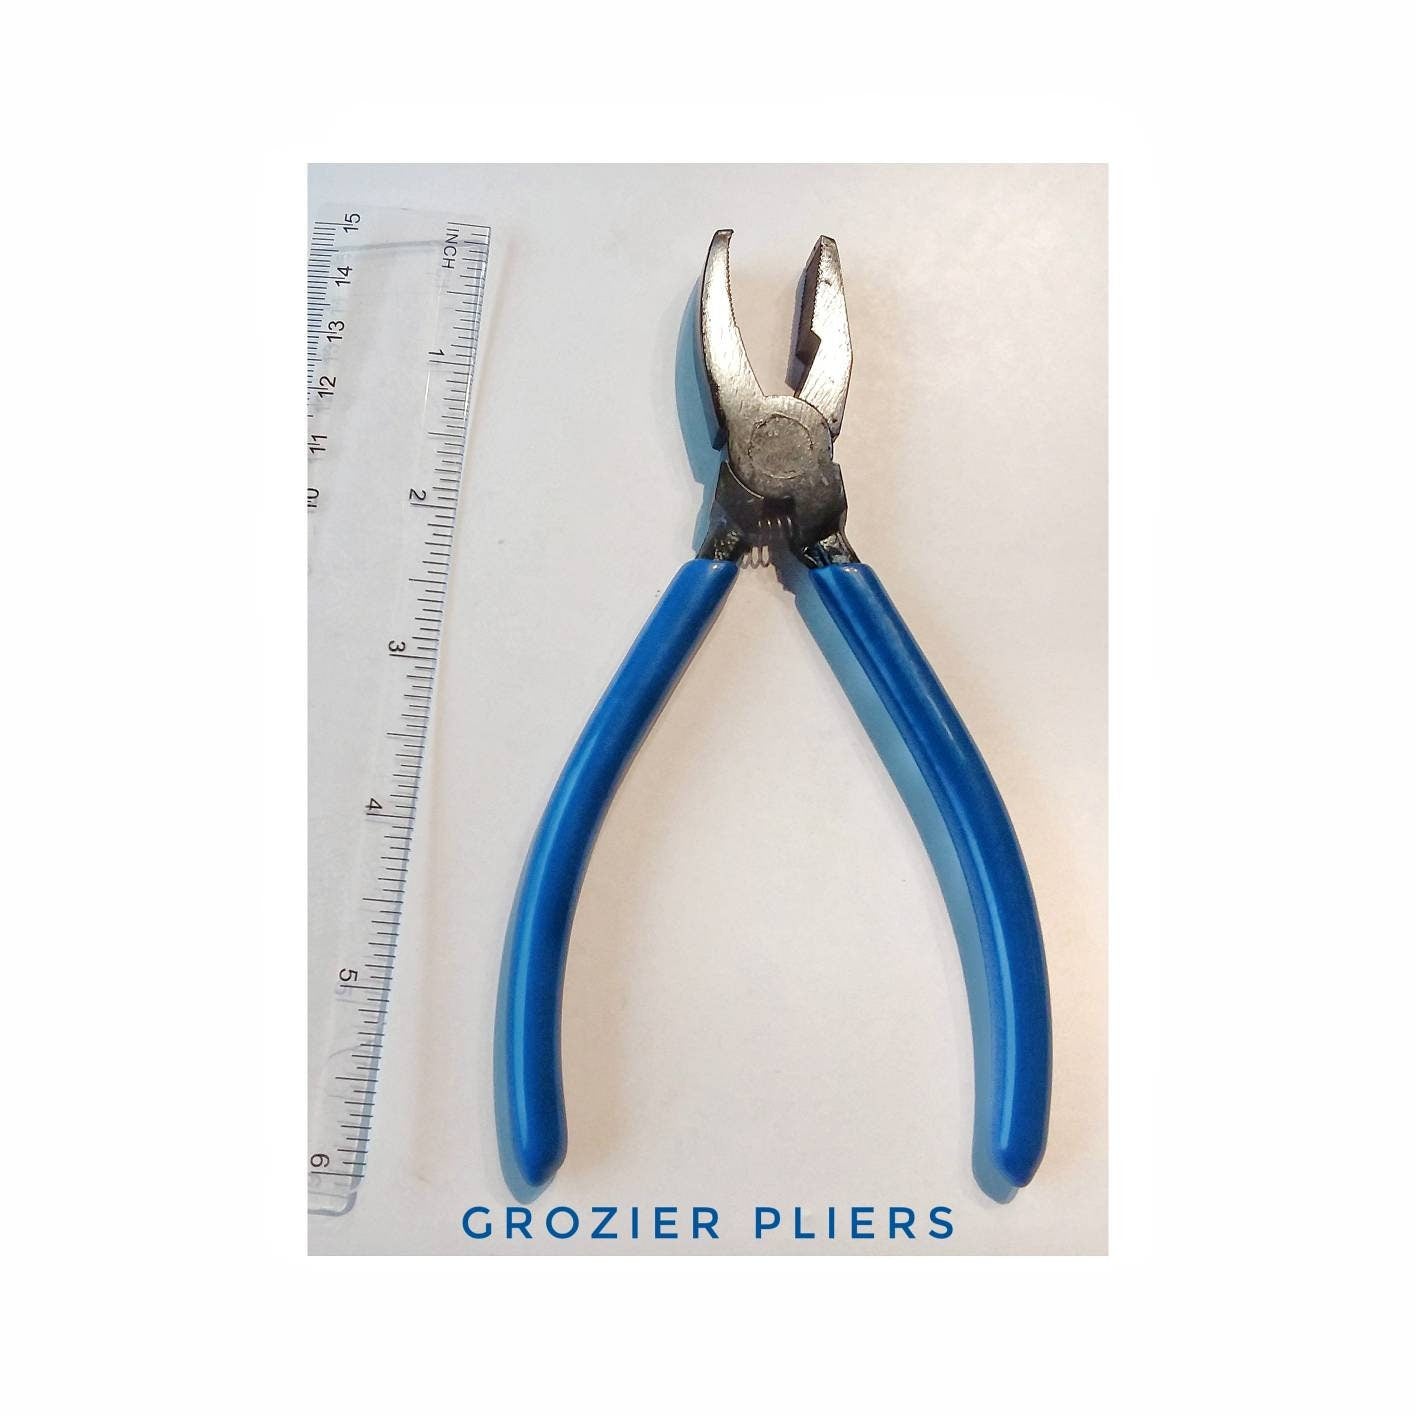 Stained Glass Pliers, Grozer for Shaping Glass Along Score. Nippers, Serrated jaw to nibble edges. Sturdy metal with red coated handles.